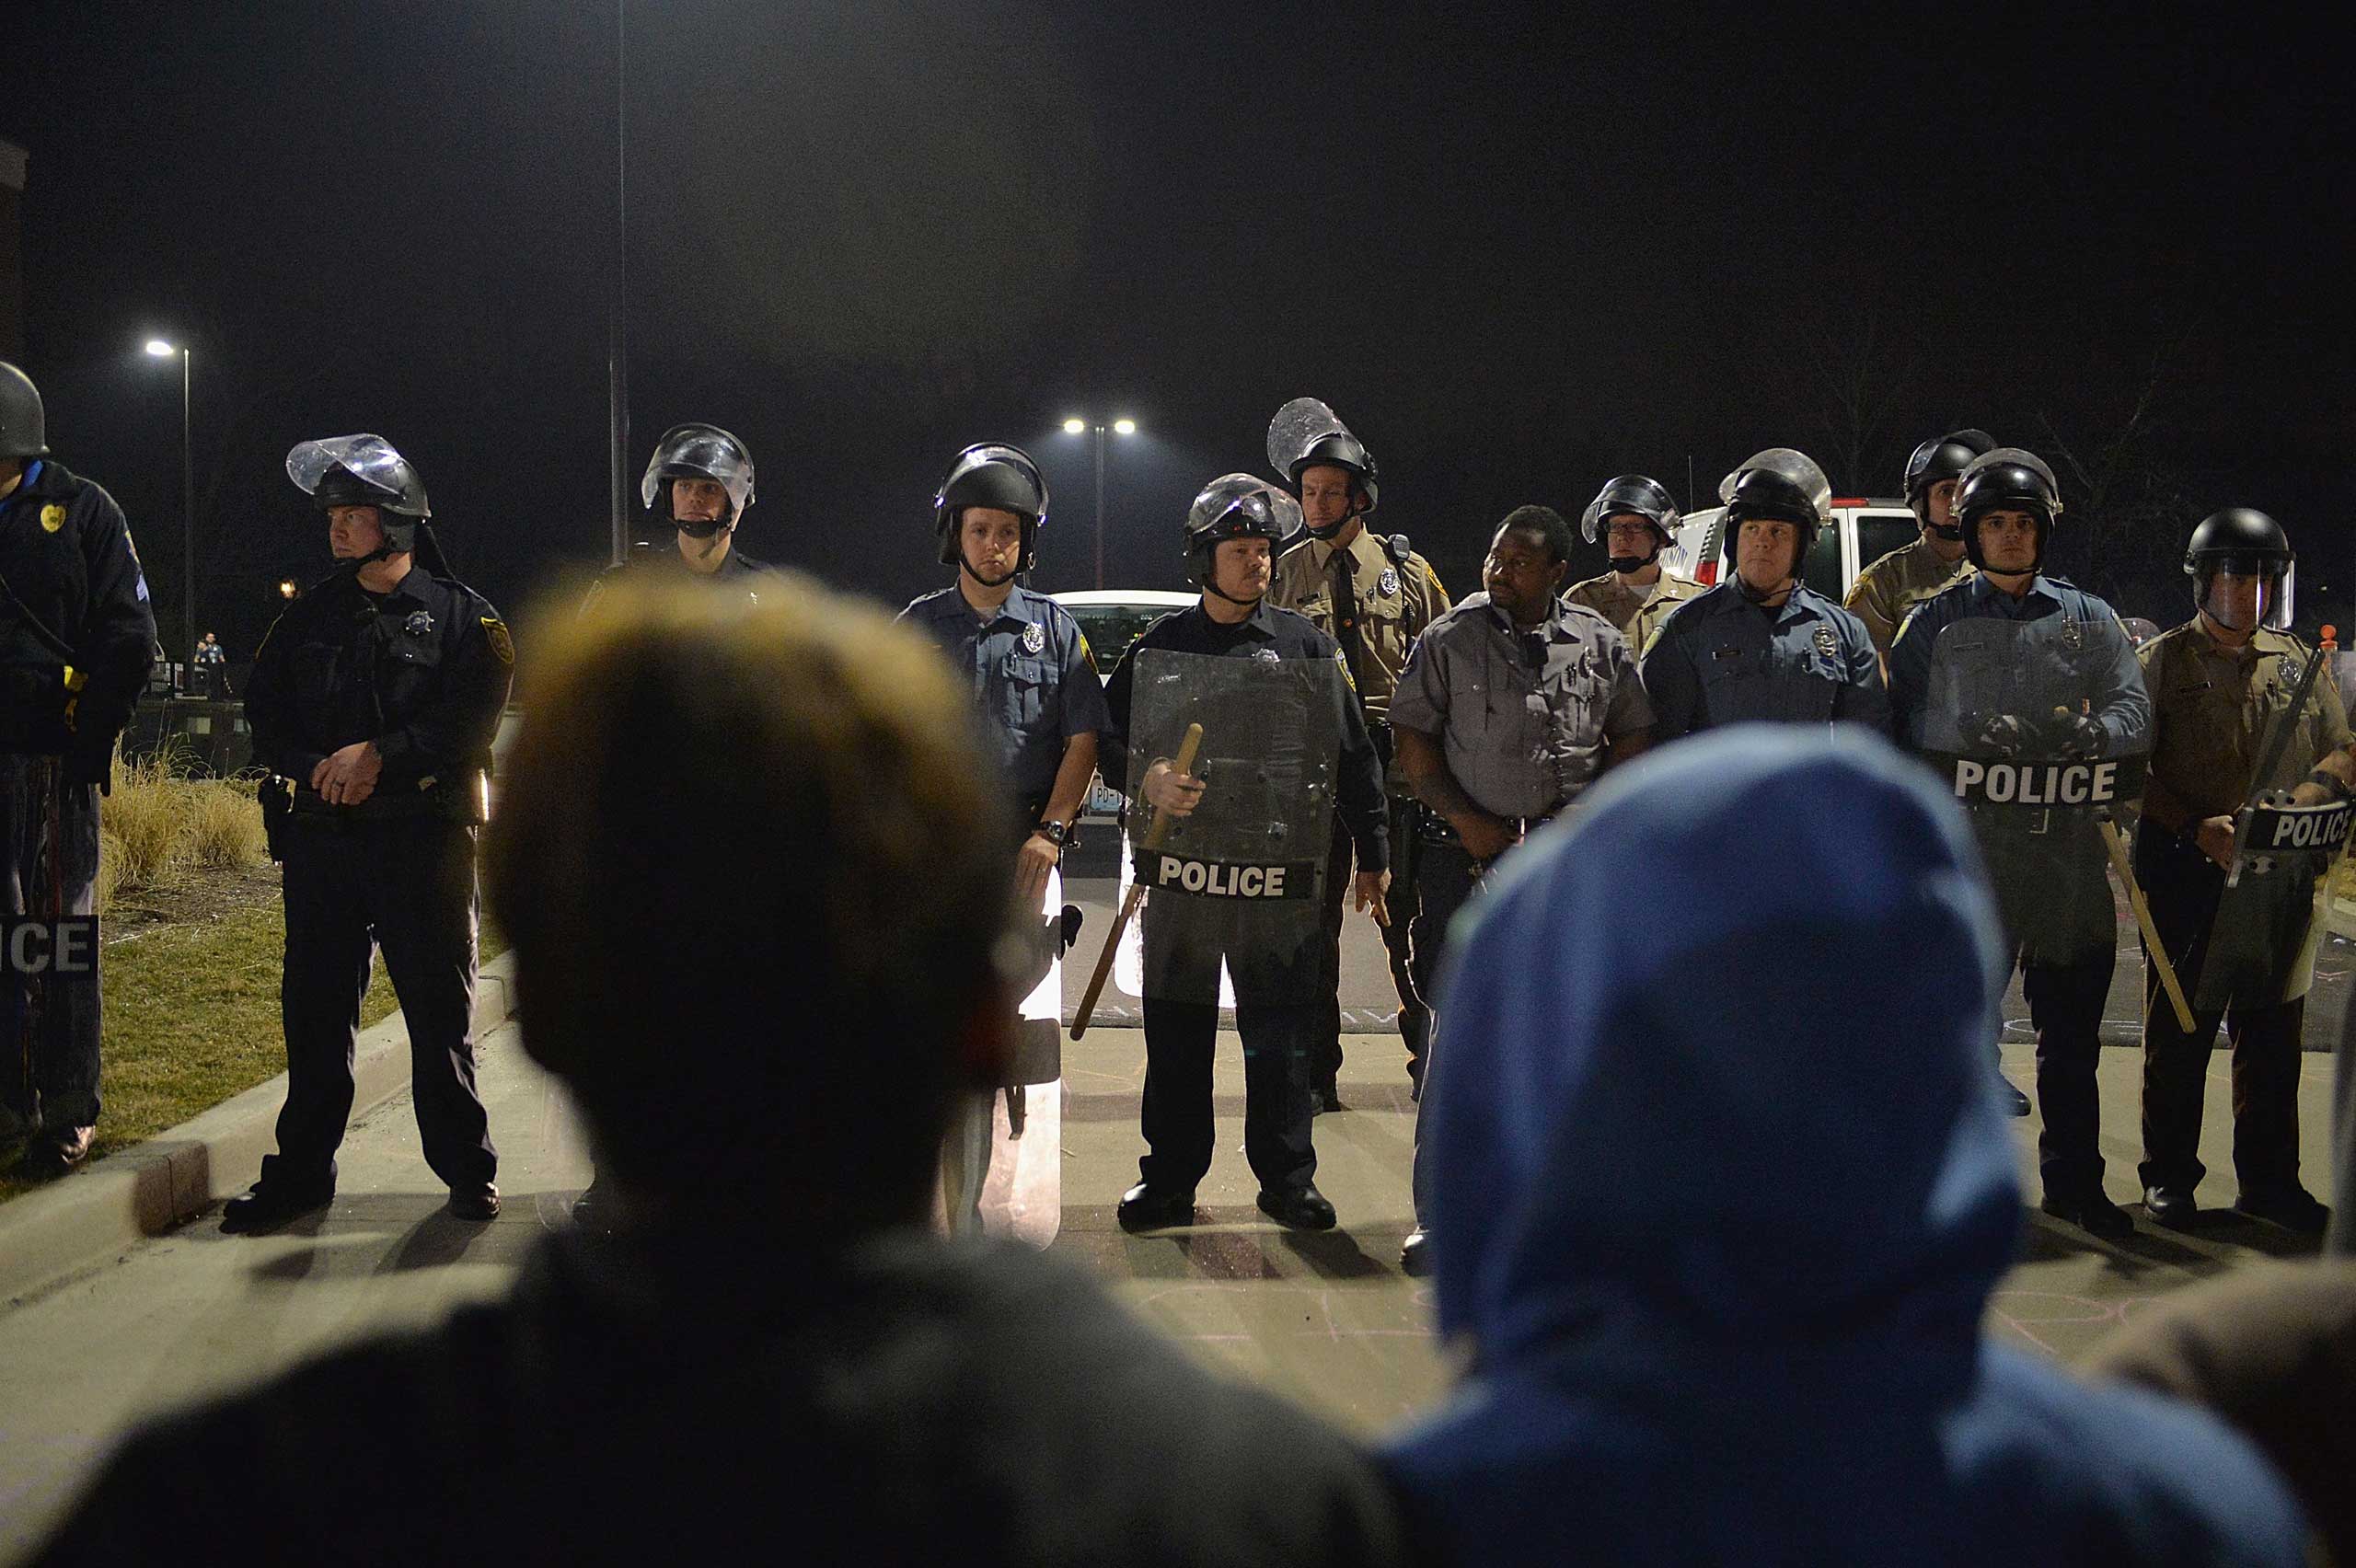 Police officers stand on alert during a protests outside the Ferguson Police Department on March 11, 2015 in Ferguson, Mo. (Michael B. Thomas—Getty Images)